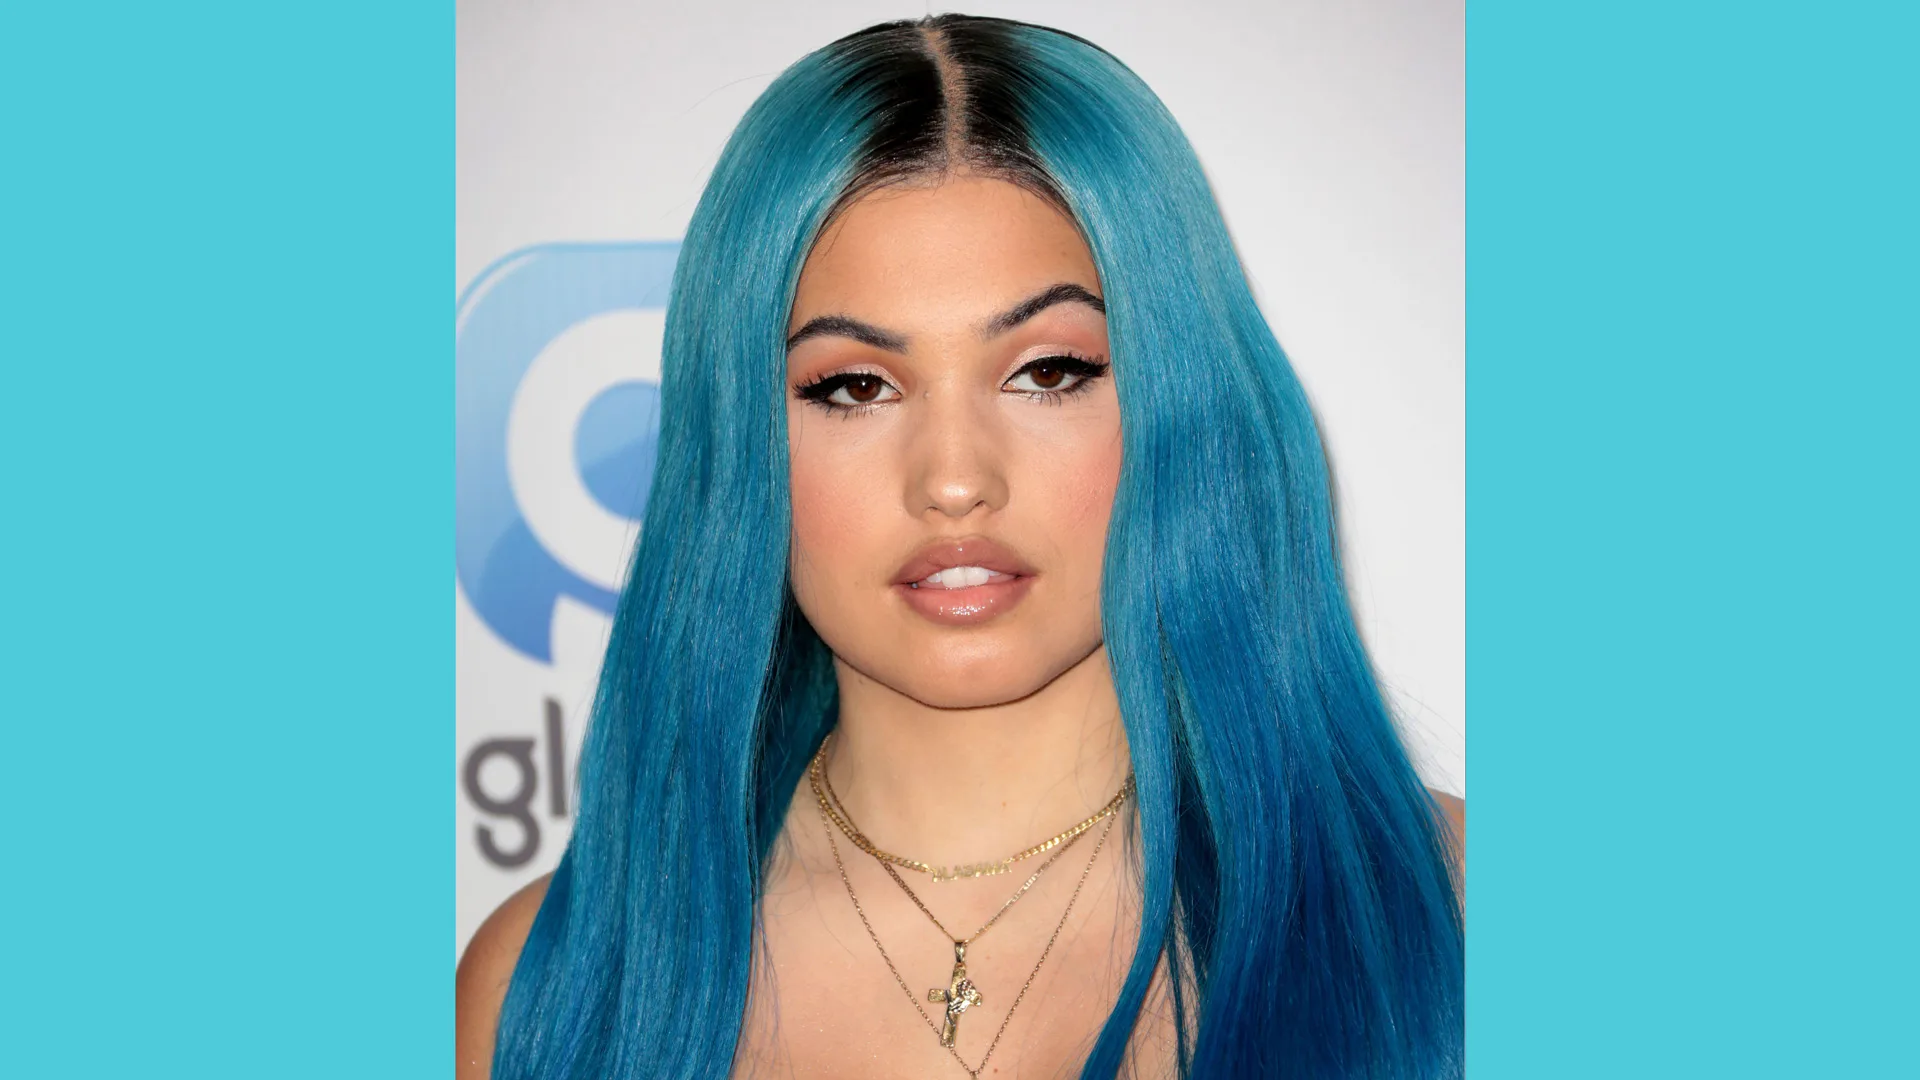 A photograph of the singer Mabel looking face on to the camera with blue hair and necklaces.